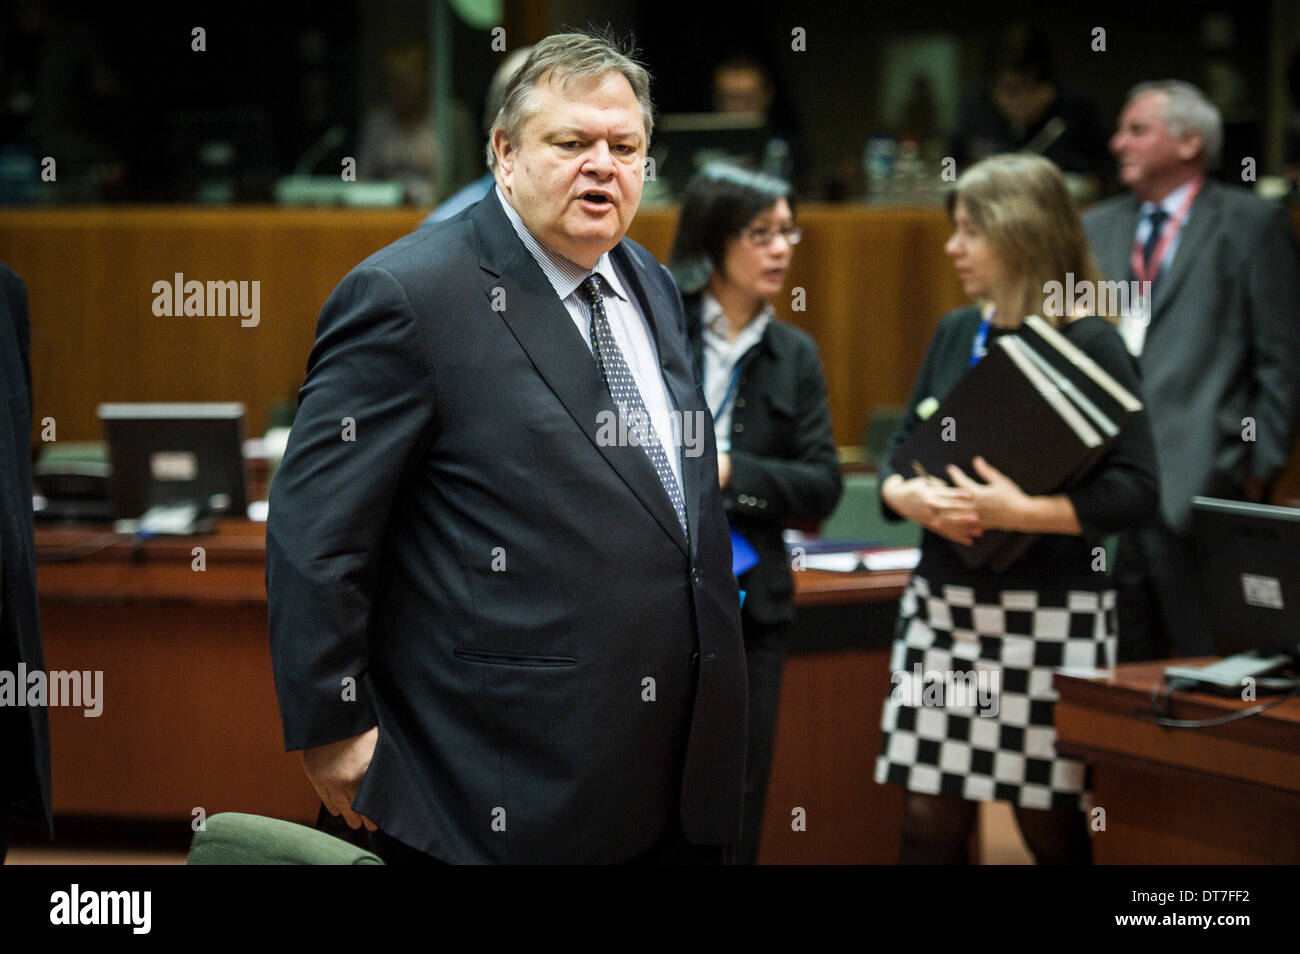 Greek Foreign Minister Evangelos Venizelos arrives during General Affair Council European Affairs ministers meeting at European Council headquarters in Brussels, Belgium on 11.02.2014 Ministers take a decision on the authorisation of the placing of the market for cultivation purposes of the genetically modified maize 1507. The Council established also an EU military operation to contribute to a secure environment in the Central African Republic, as authorised by the UN Security Council in resolution 2134. by Wiktor Dabkowski Stock Photo